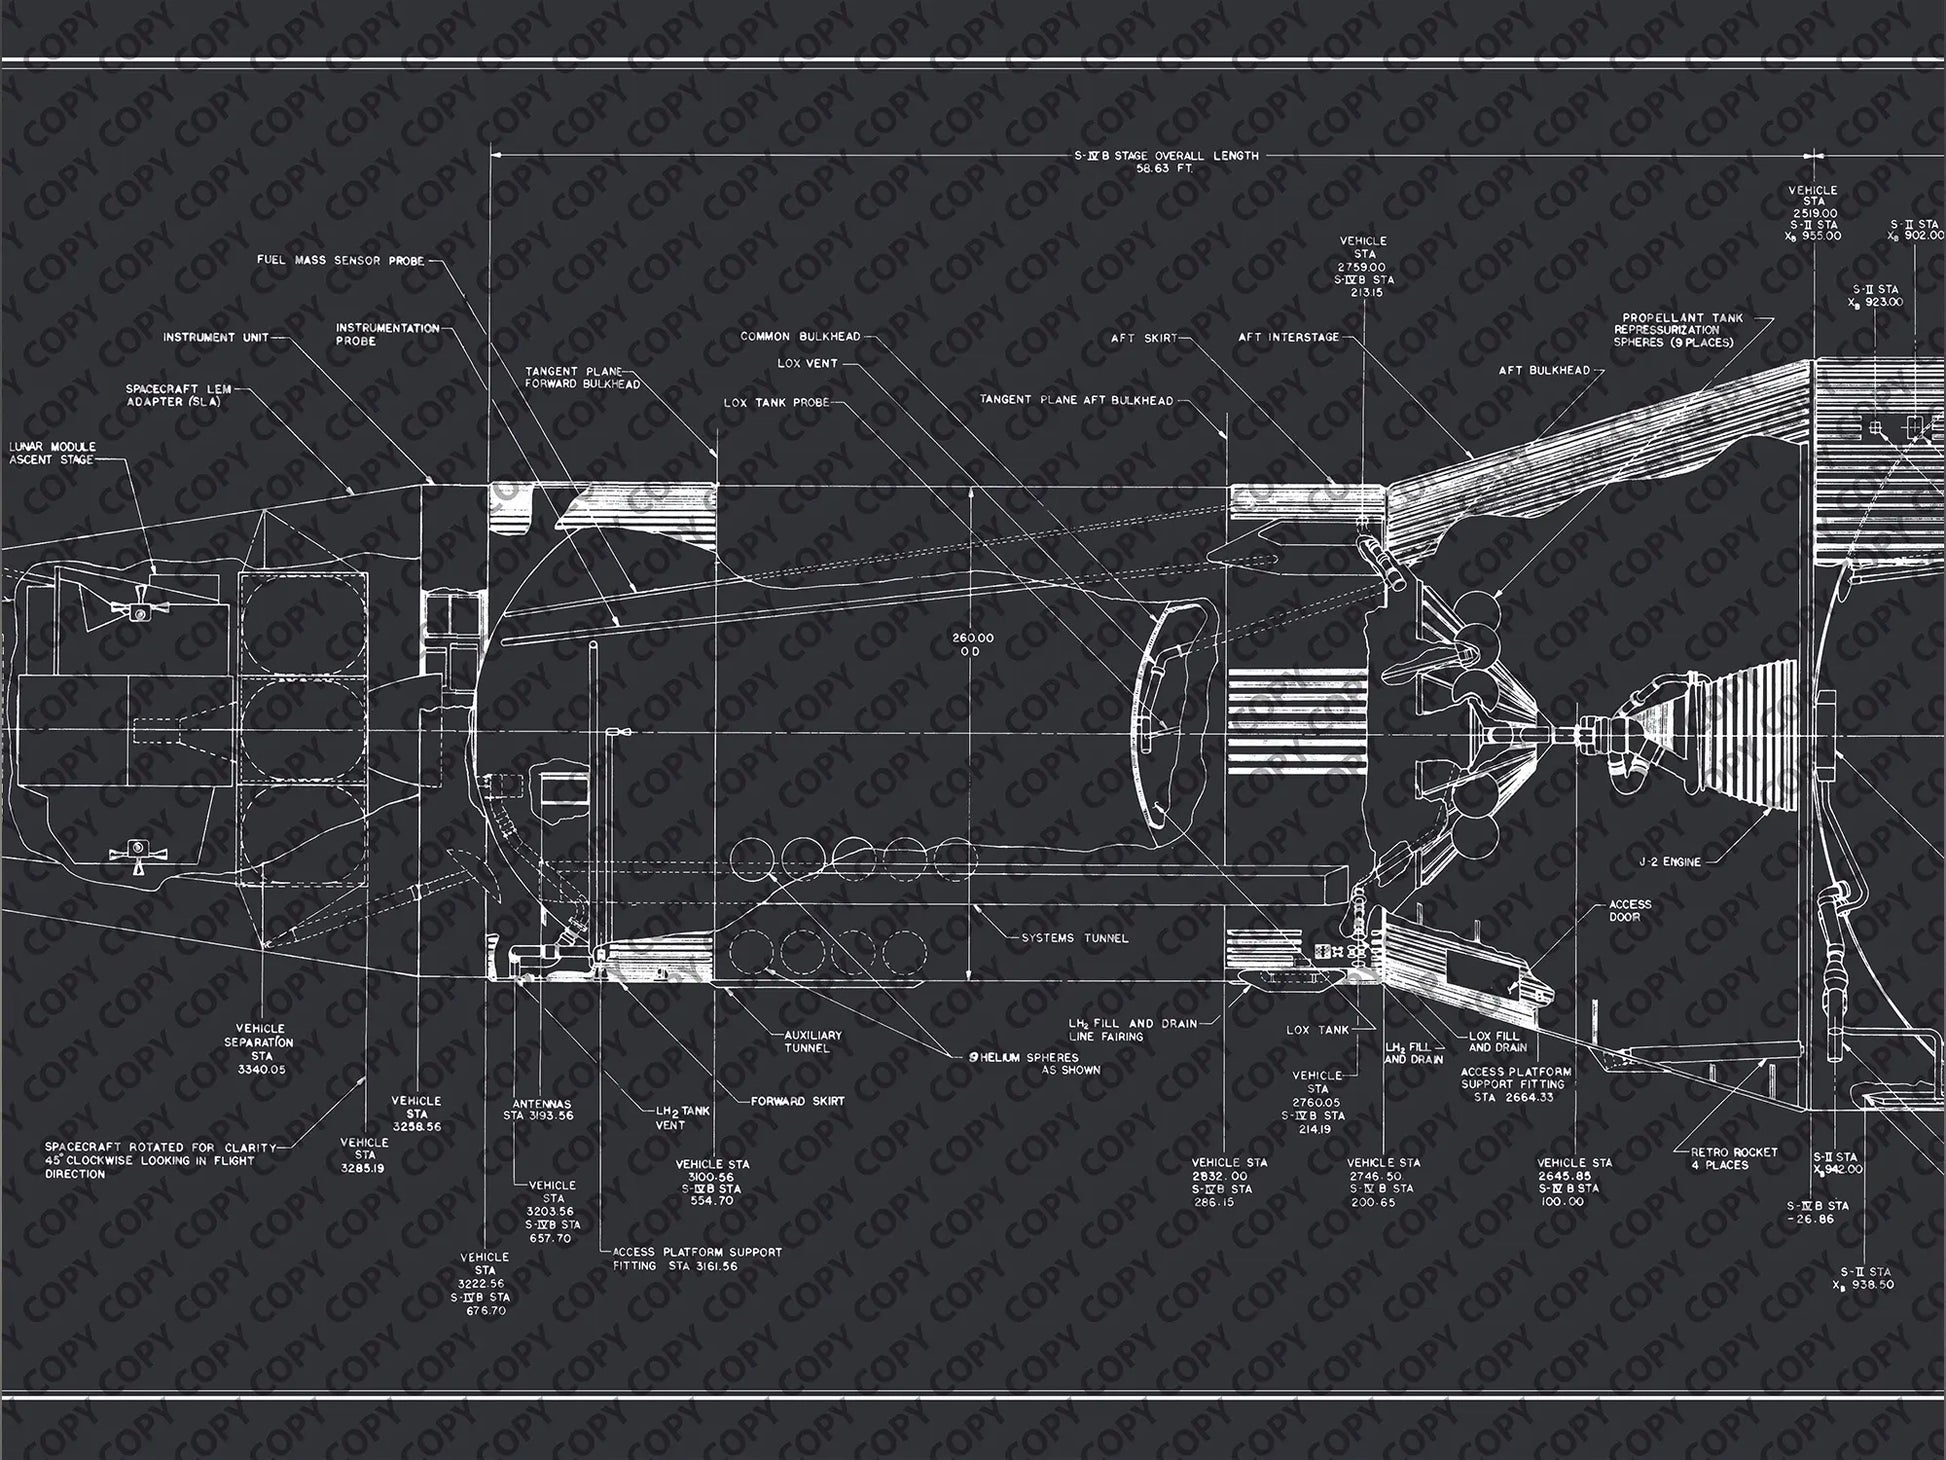 Apollo Saturn V | Rocket Blueprint Posters | Technical Diagram | NASA | A detailed schematic from the Saturn V rocket blueprint, showing various labeled components including the lunar module ascent stage, forward bulkhead, and S-II engine on a dark background.